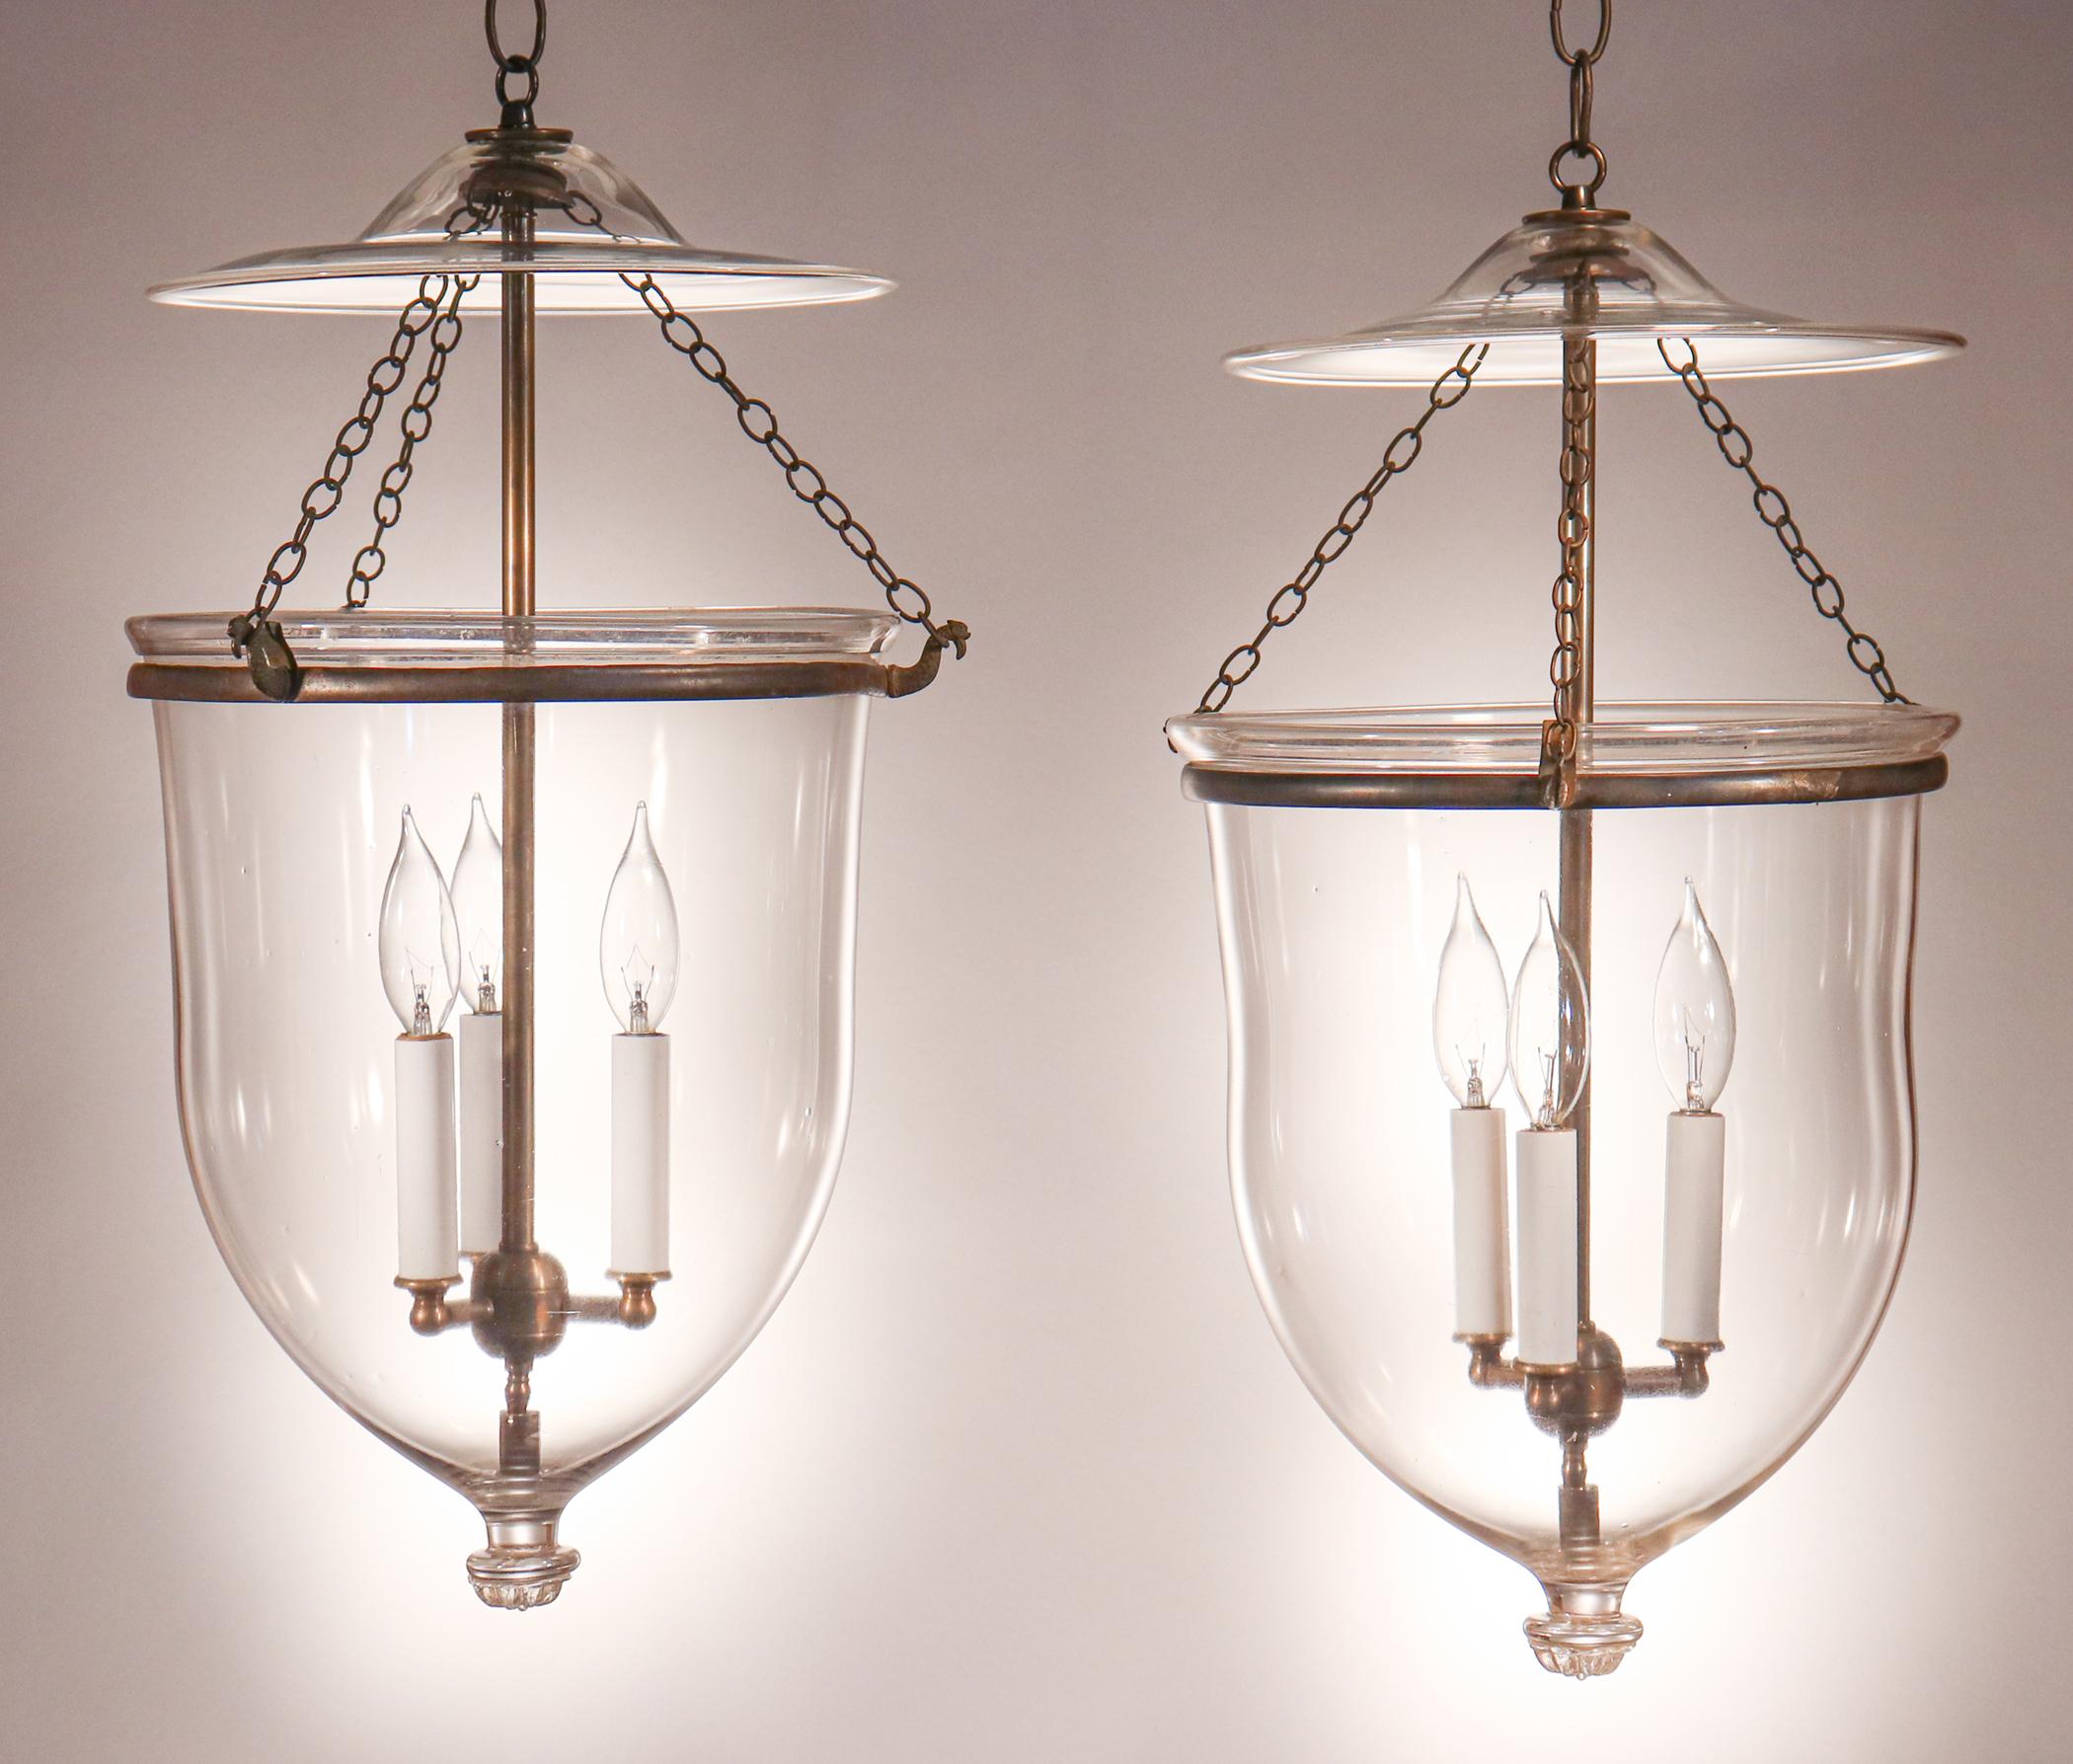 A beautiful pair of hand blown glass bell jar lanterns with original brass bands and chains. These circa 1870 larger-sized English pendants are finished with a distinctive floral design on the brass pontil (see close-up image). The lanterns have